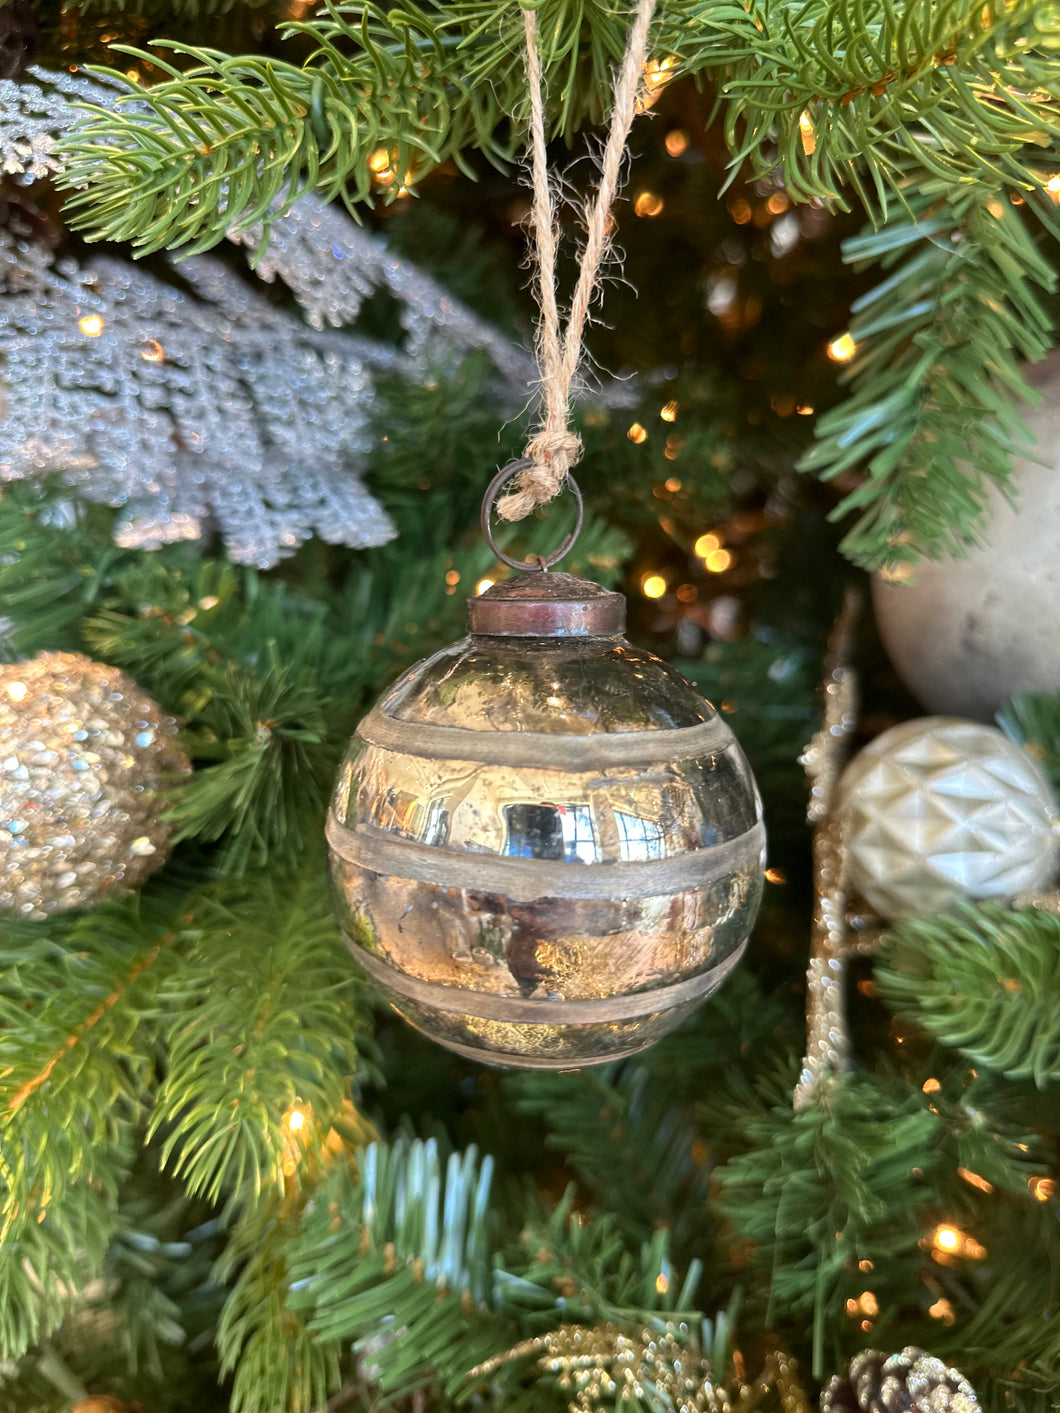 A vintage gold modern ornament with stripes. The ornament is round and has a gold-colored base. The stripes are horizontal and are in different shades of gold. The ornament is hanging from a twine string.